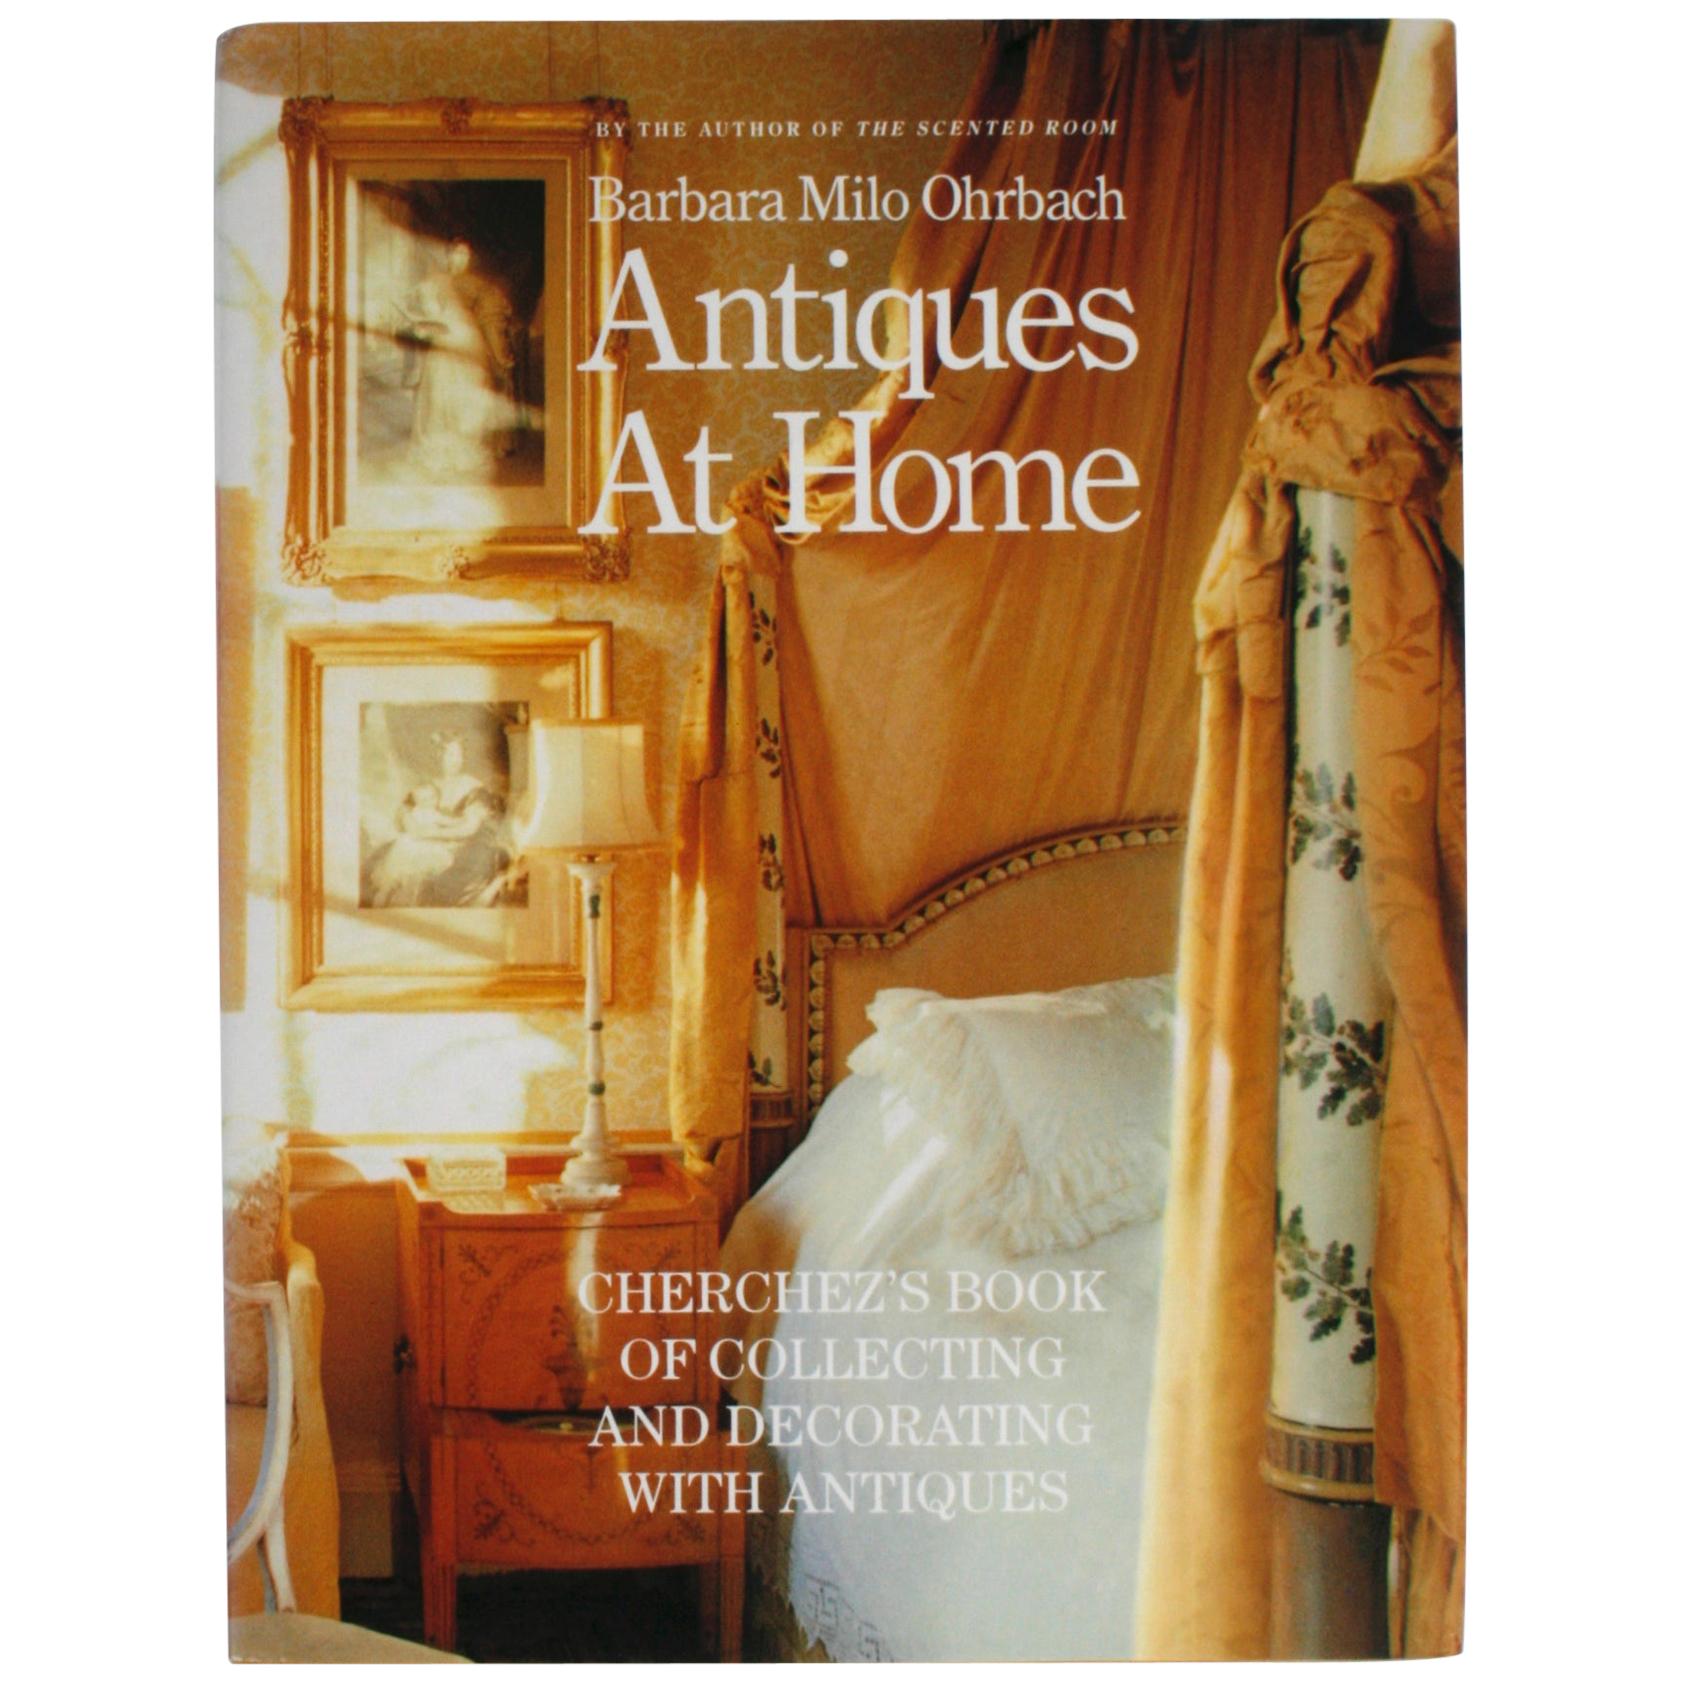 Antiques At Home by Barbara Milo Ohrbach, Stated First Edition